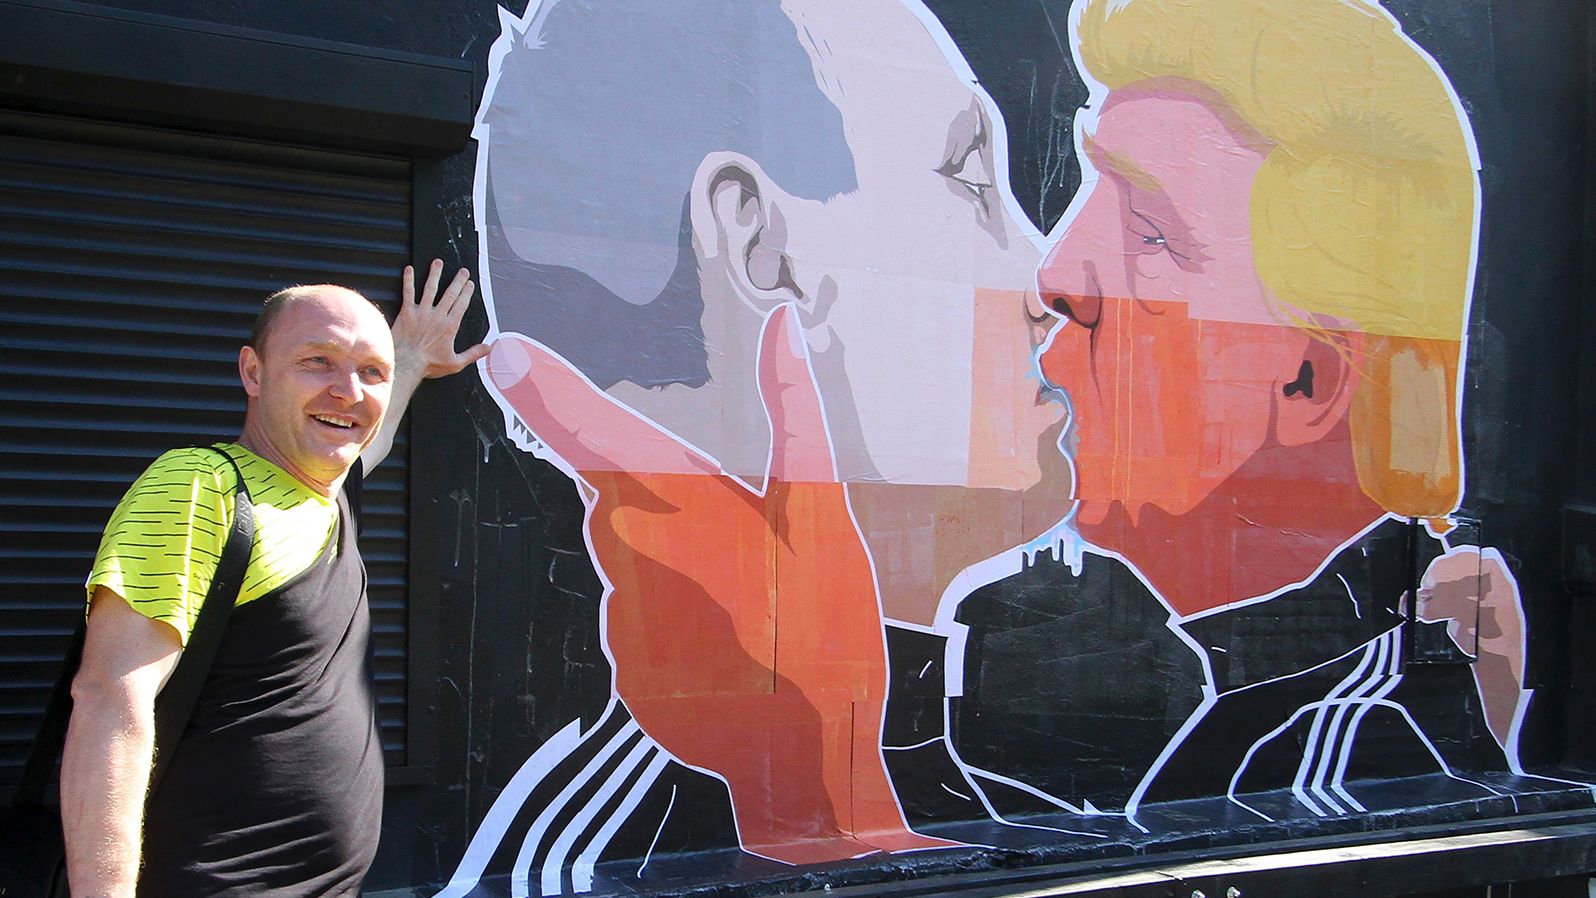 A man poses next to a mural on the wall of Keule Ruke depicting U.S. Presidential hopeful Donald Trump and Russian President Vladimir Putin greeting each other with a kiss in the Lithuanian capital of Vilnius on May 13, 2016.